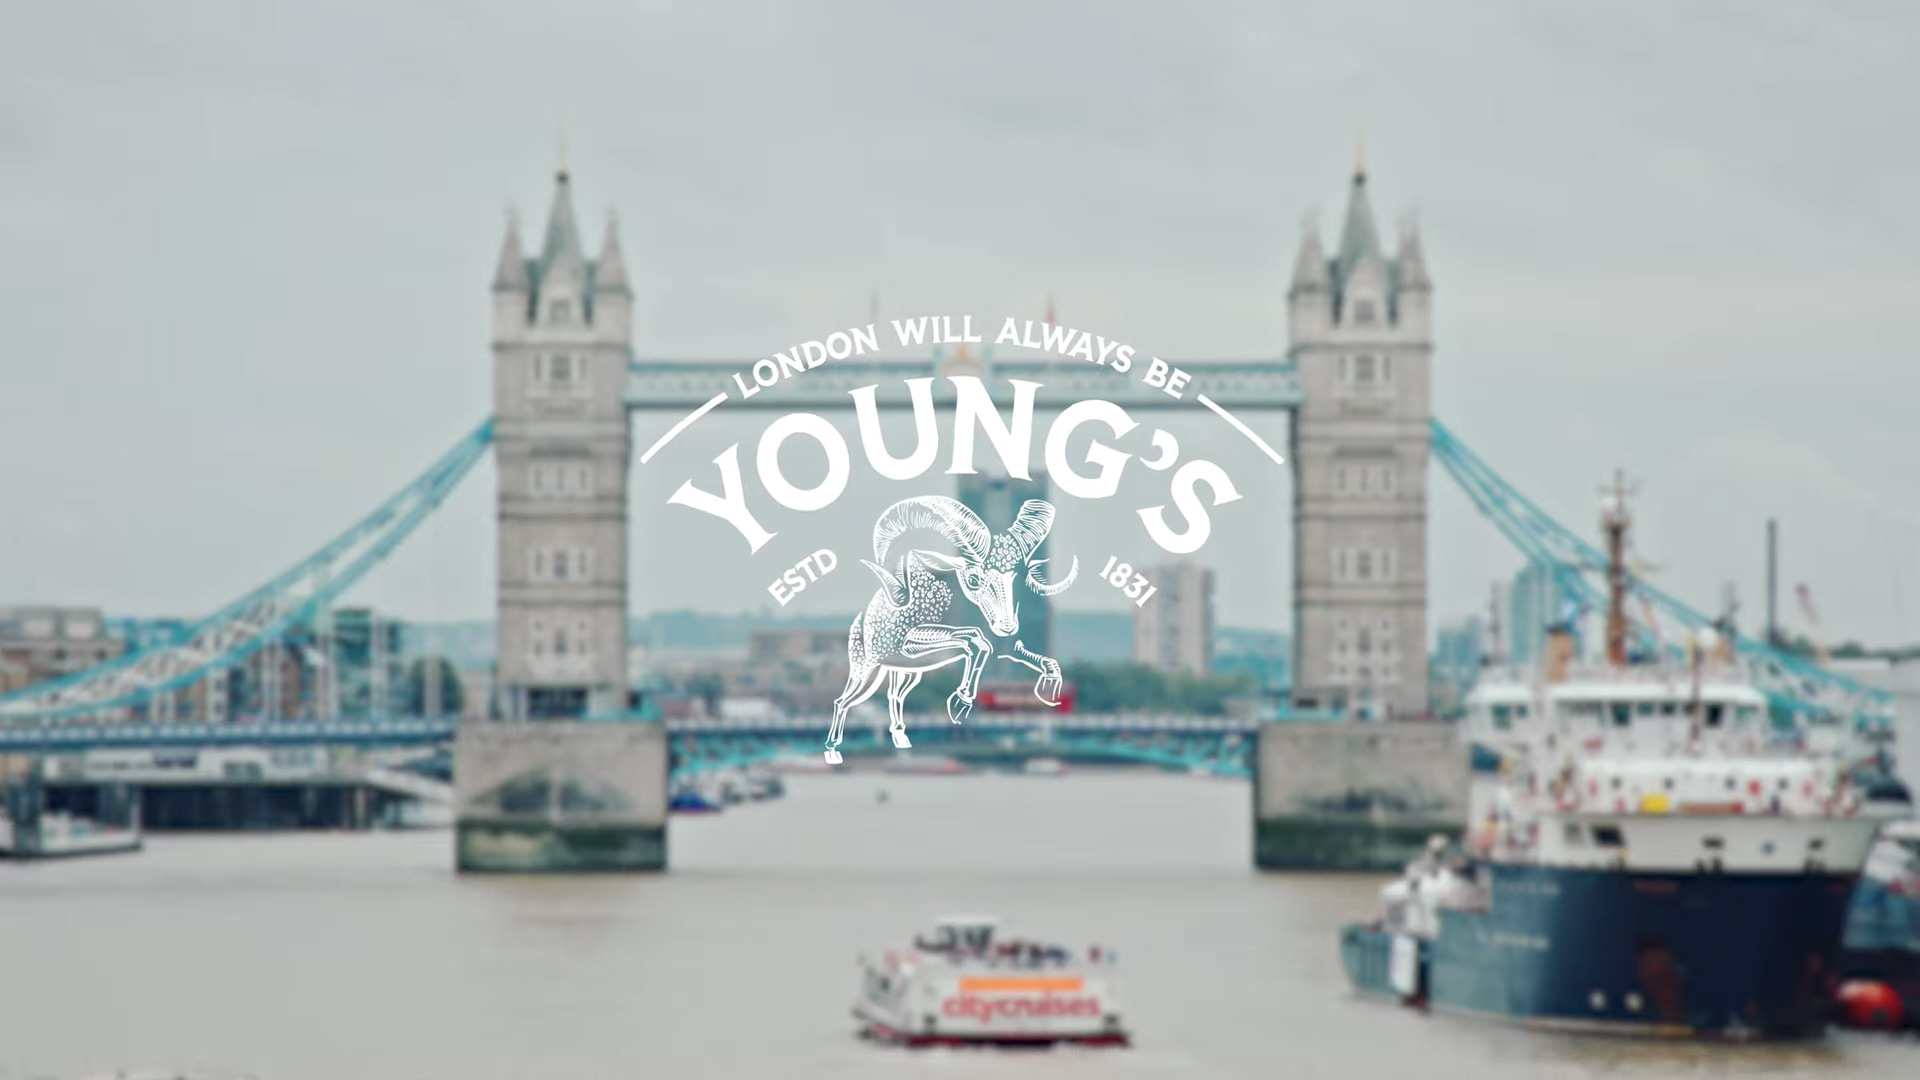 New Logo and Packaging for Young's by Kingdom & Sparrow